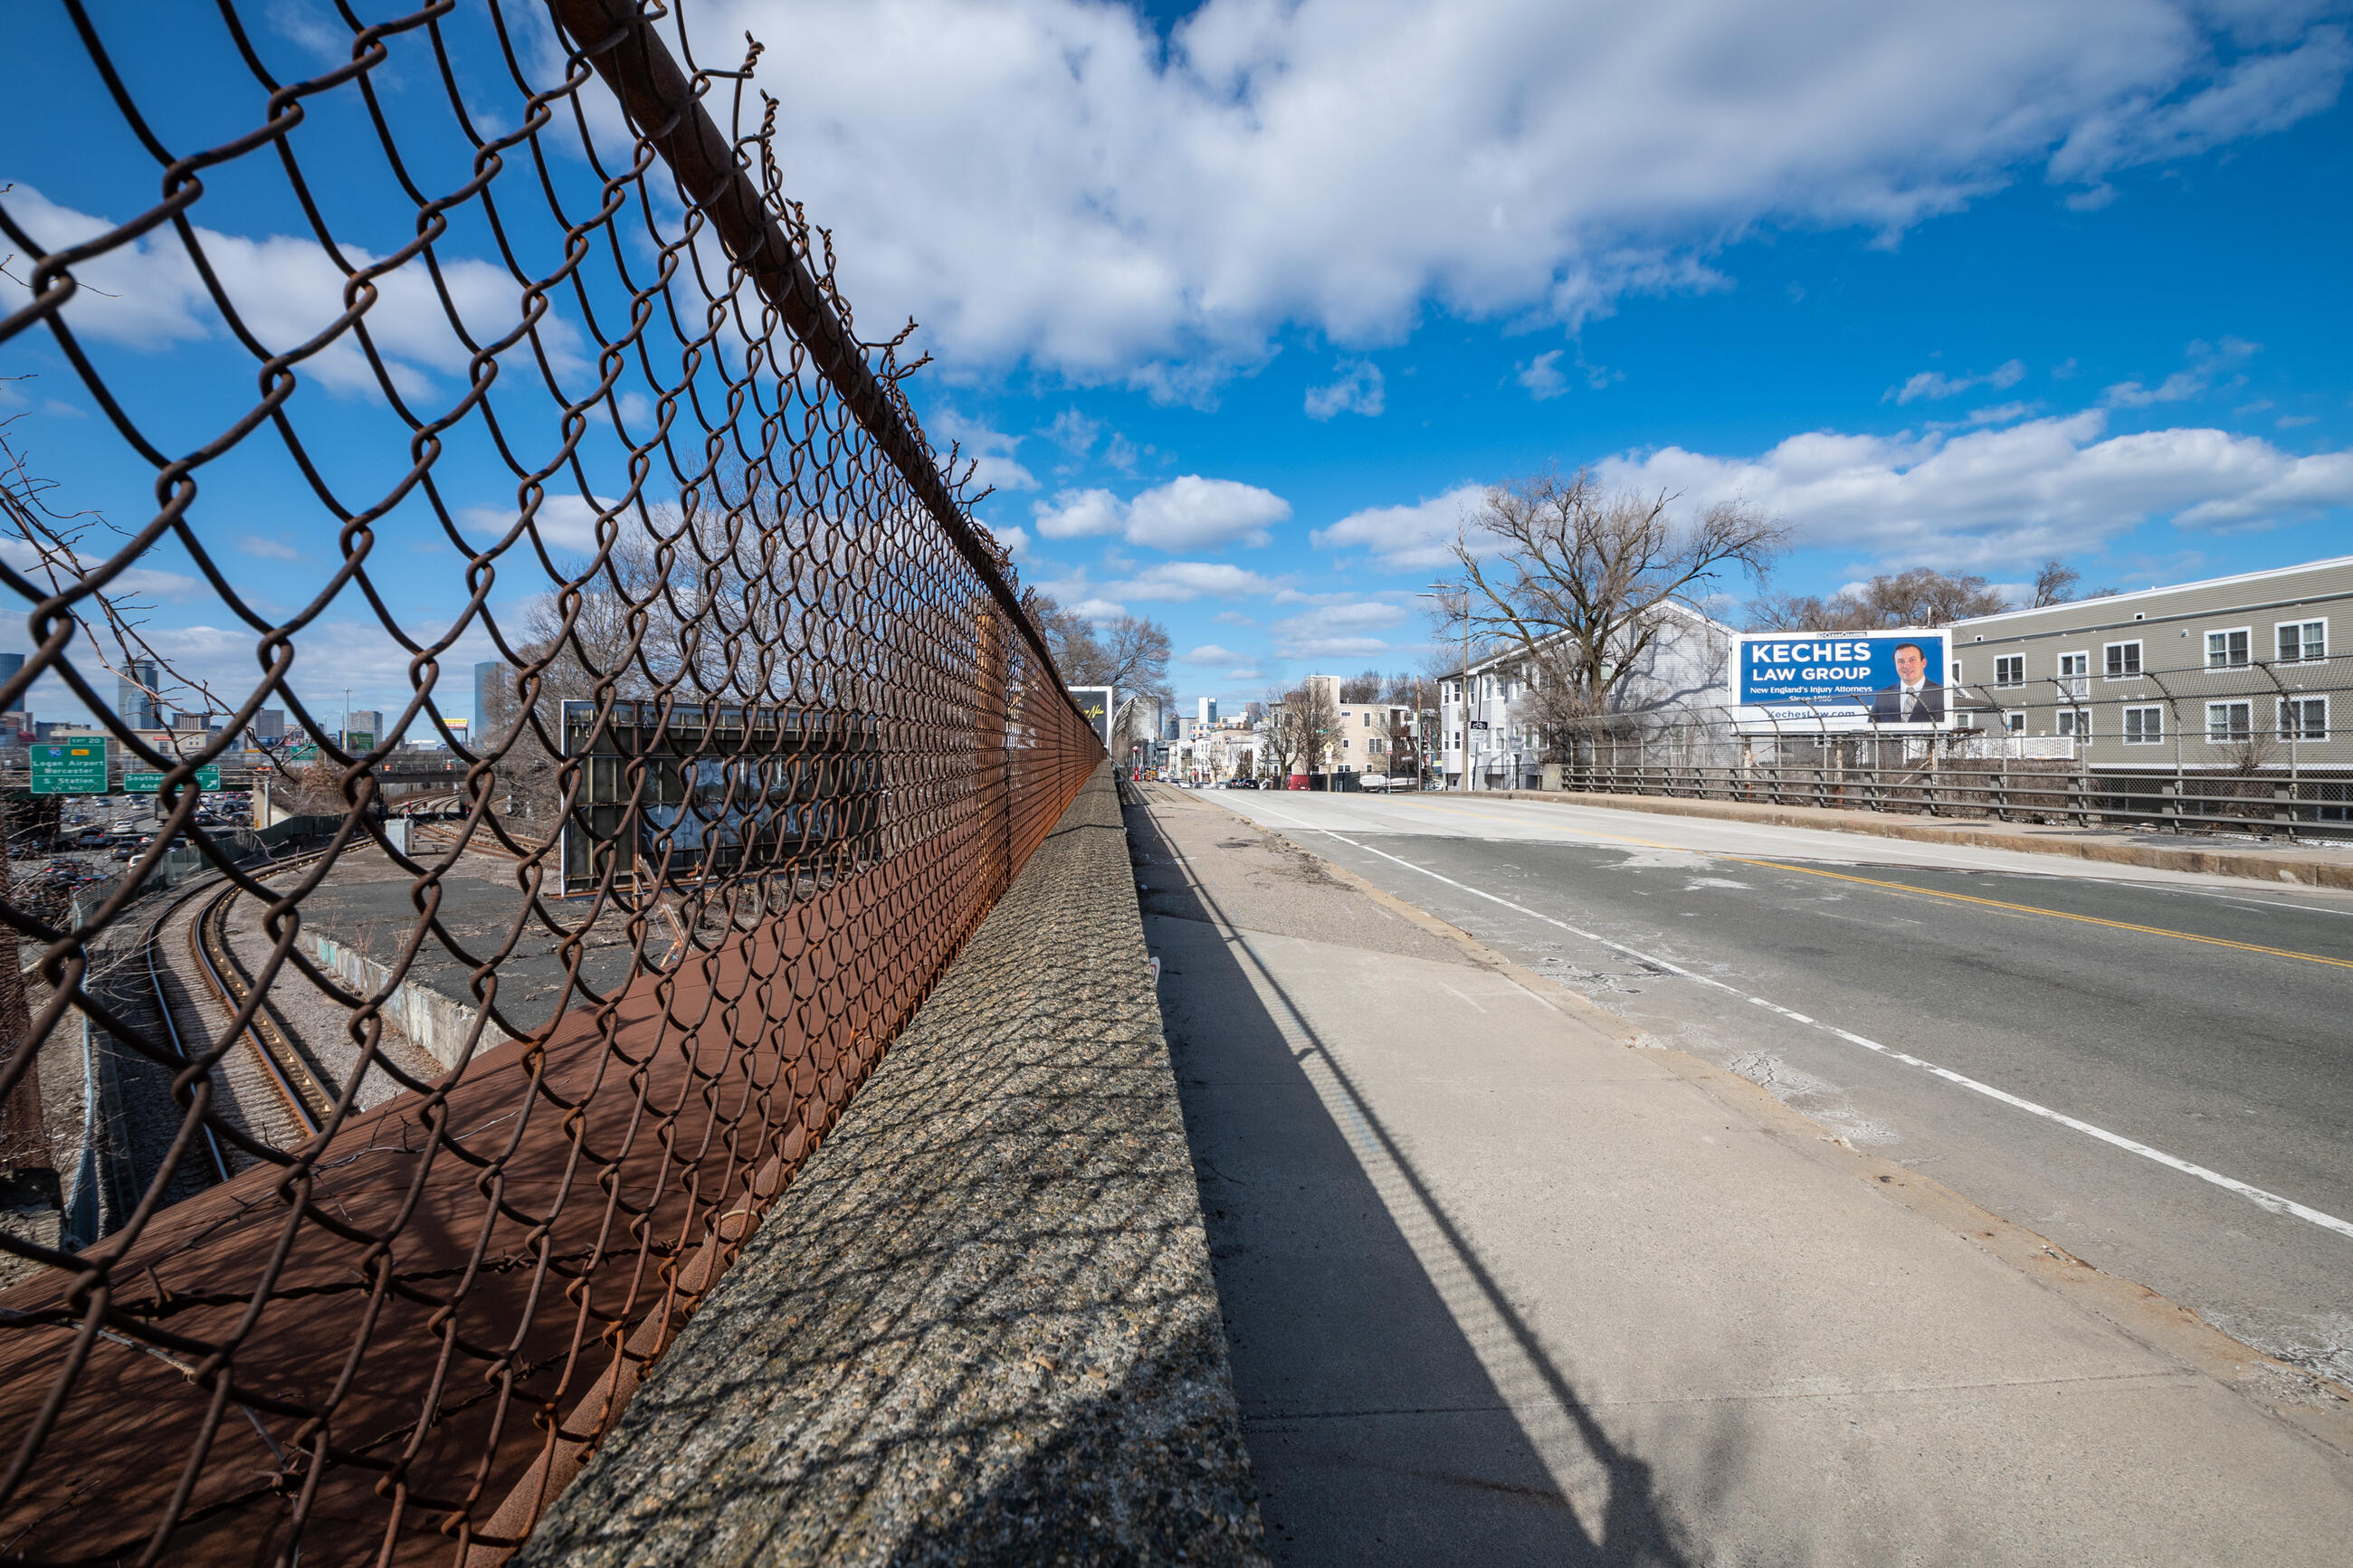 A photo taken on top of the Dorchester Avenue bridge. A highway and train tracks are visible to the left, through a chain link fence.